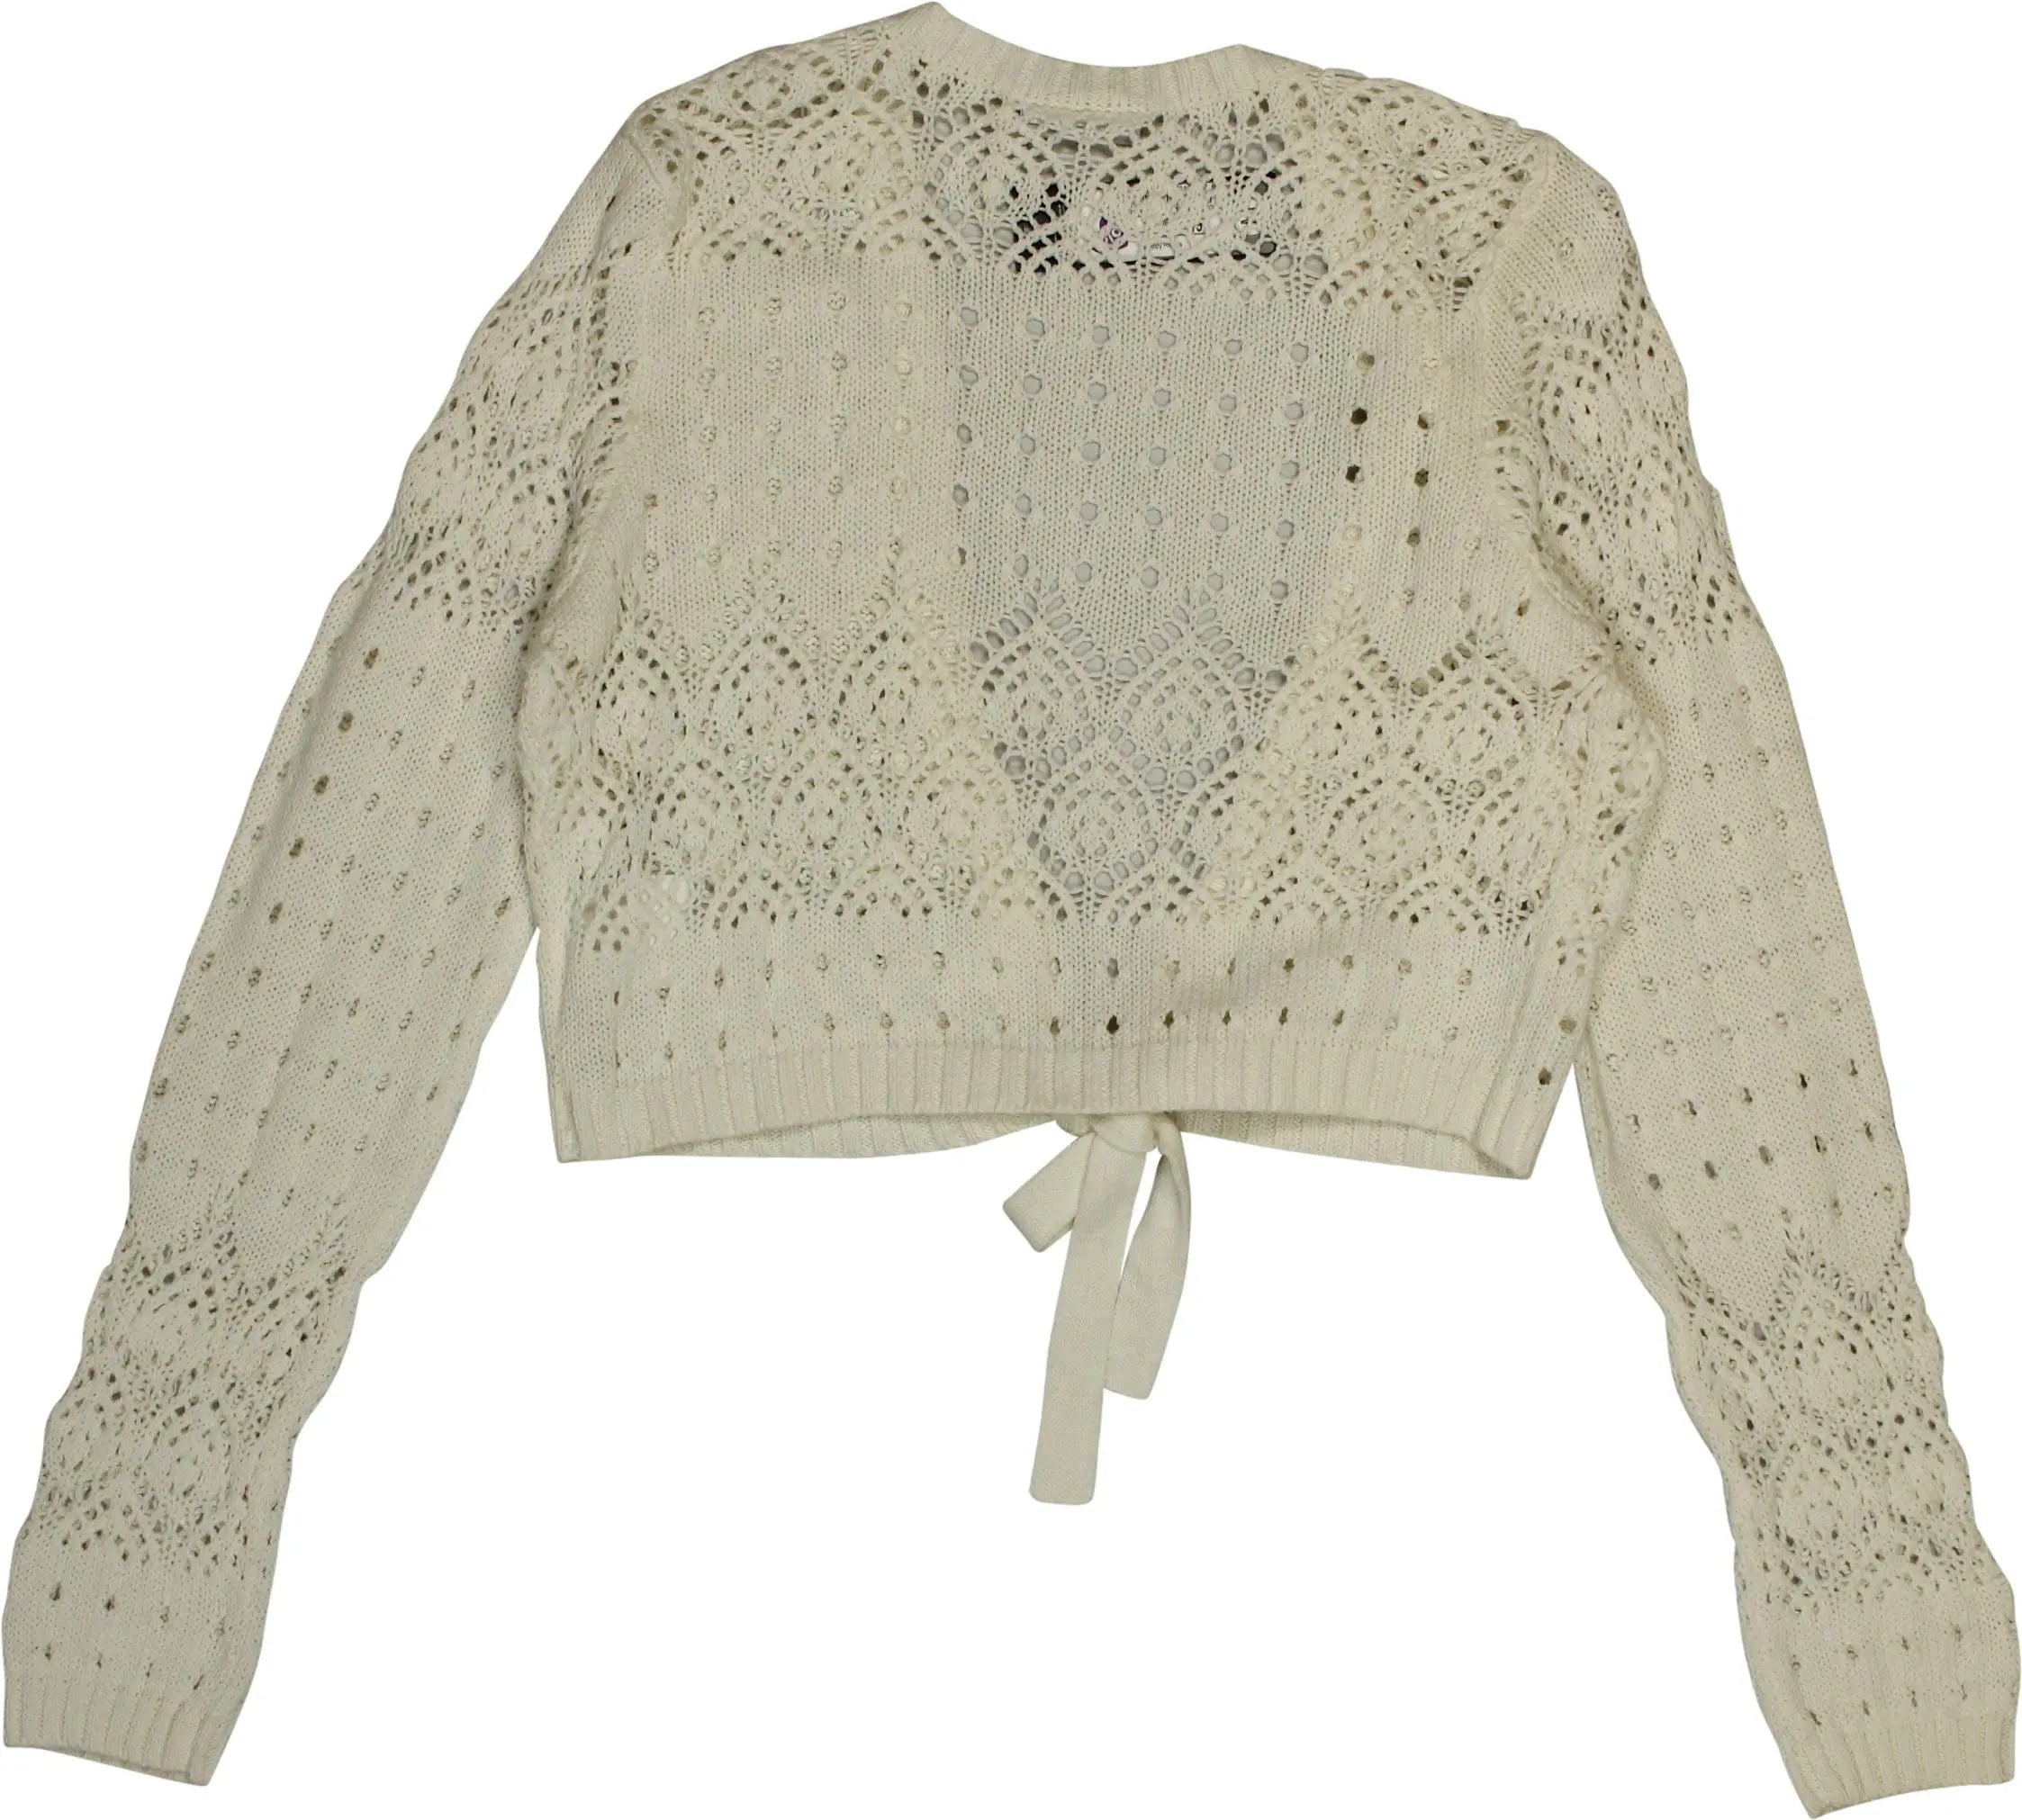 C&A - Crochet Cardigan- ThriftTale.com - Vintage and second handclothing